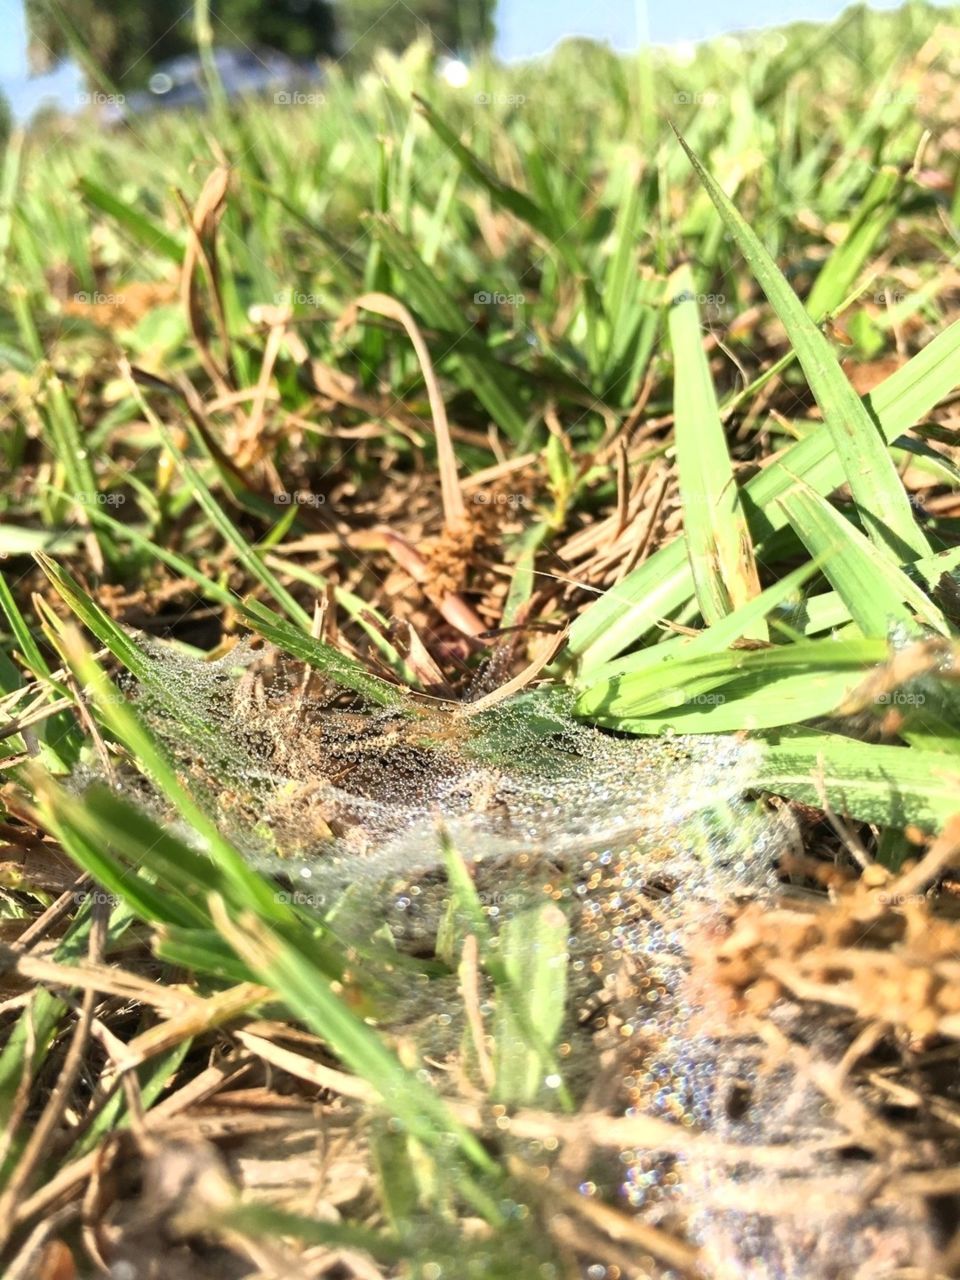 Spiderweb in the grass with dew on the web